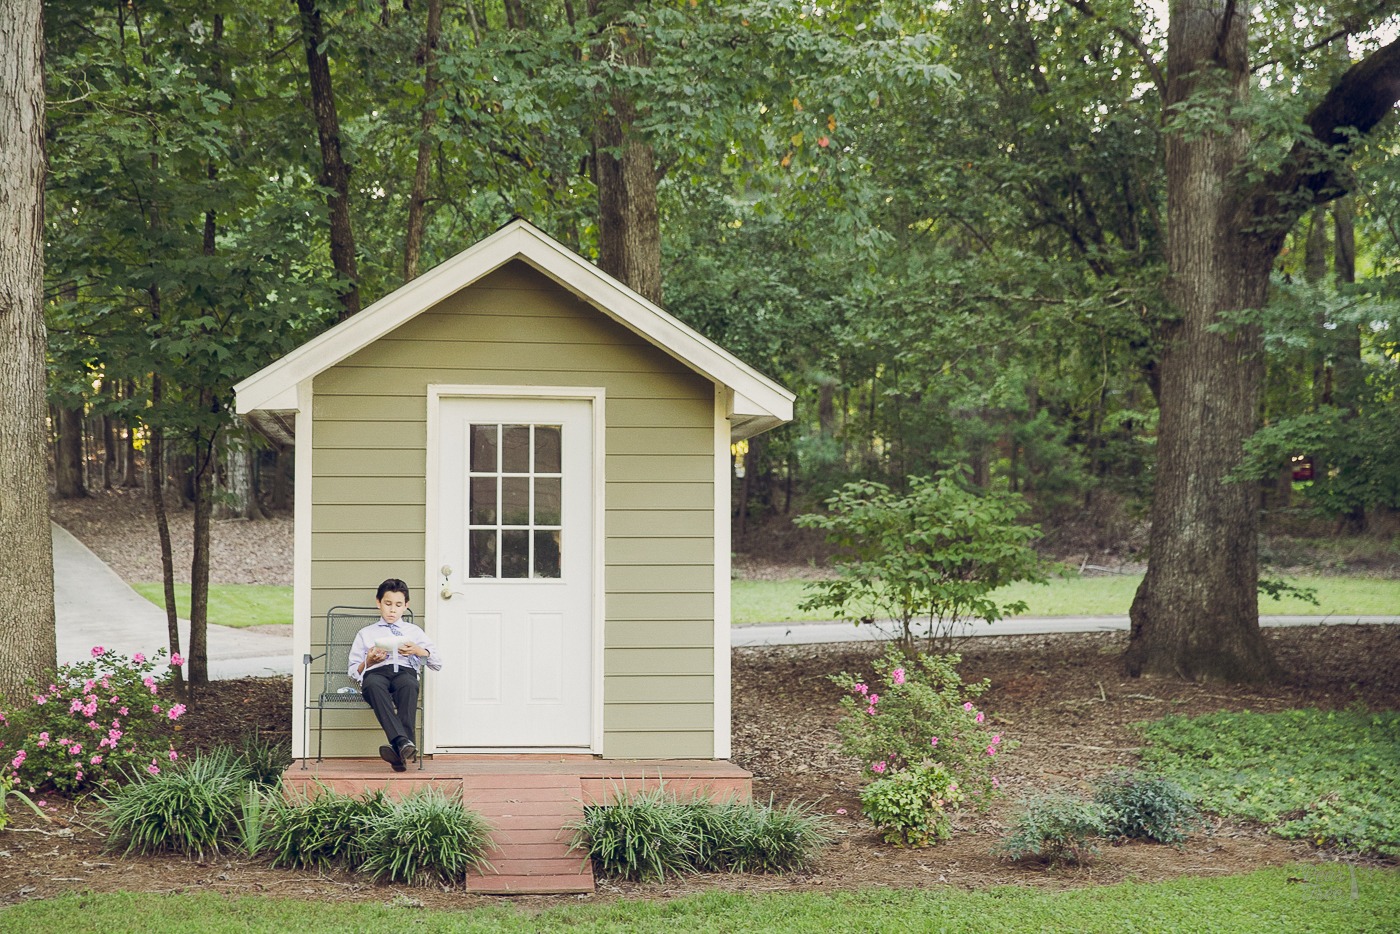 Bride's son sitting relaxed outside a pretty garden shed before the wedding